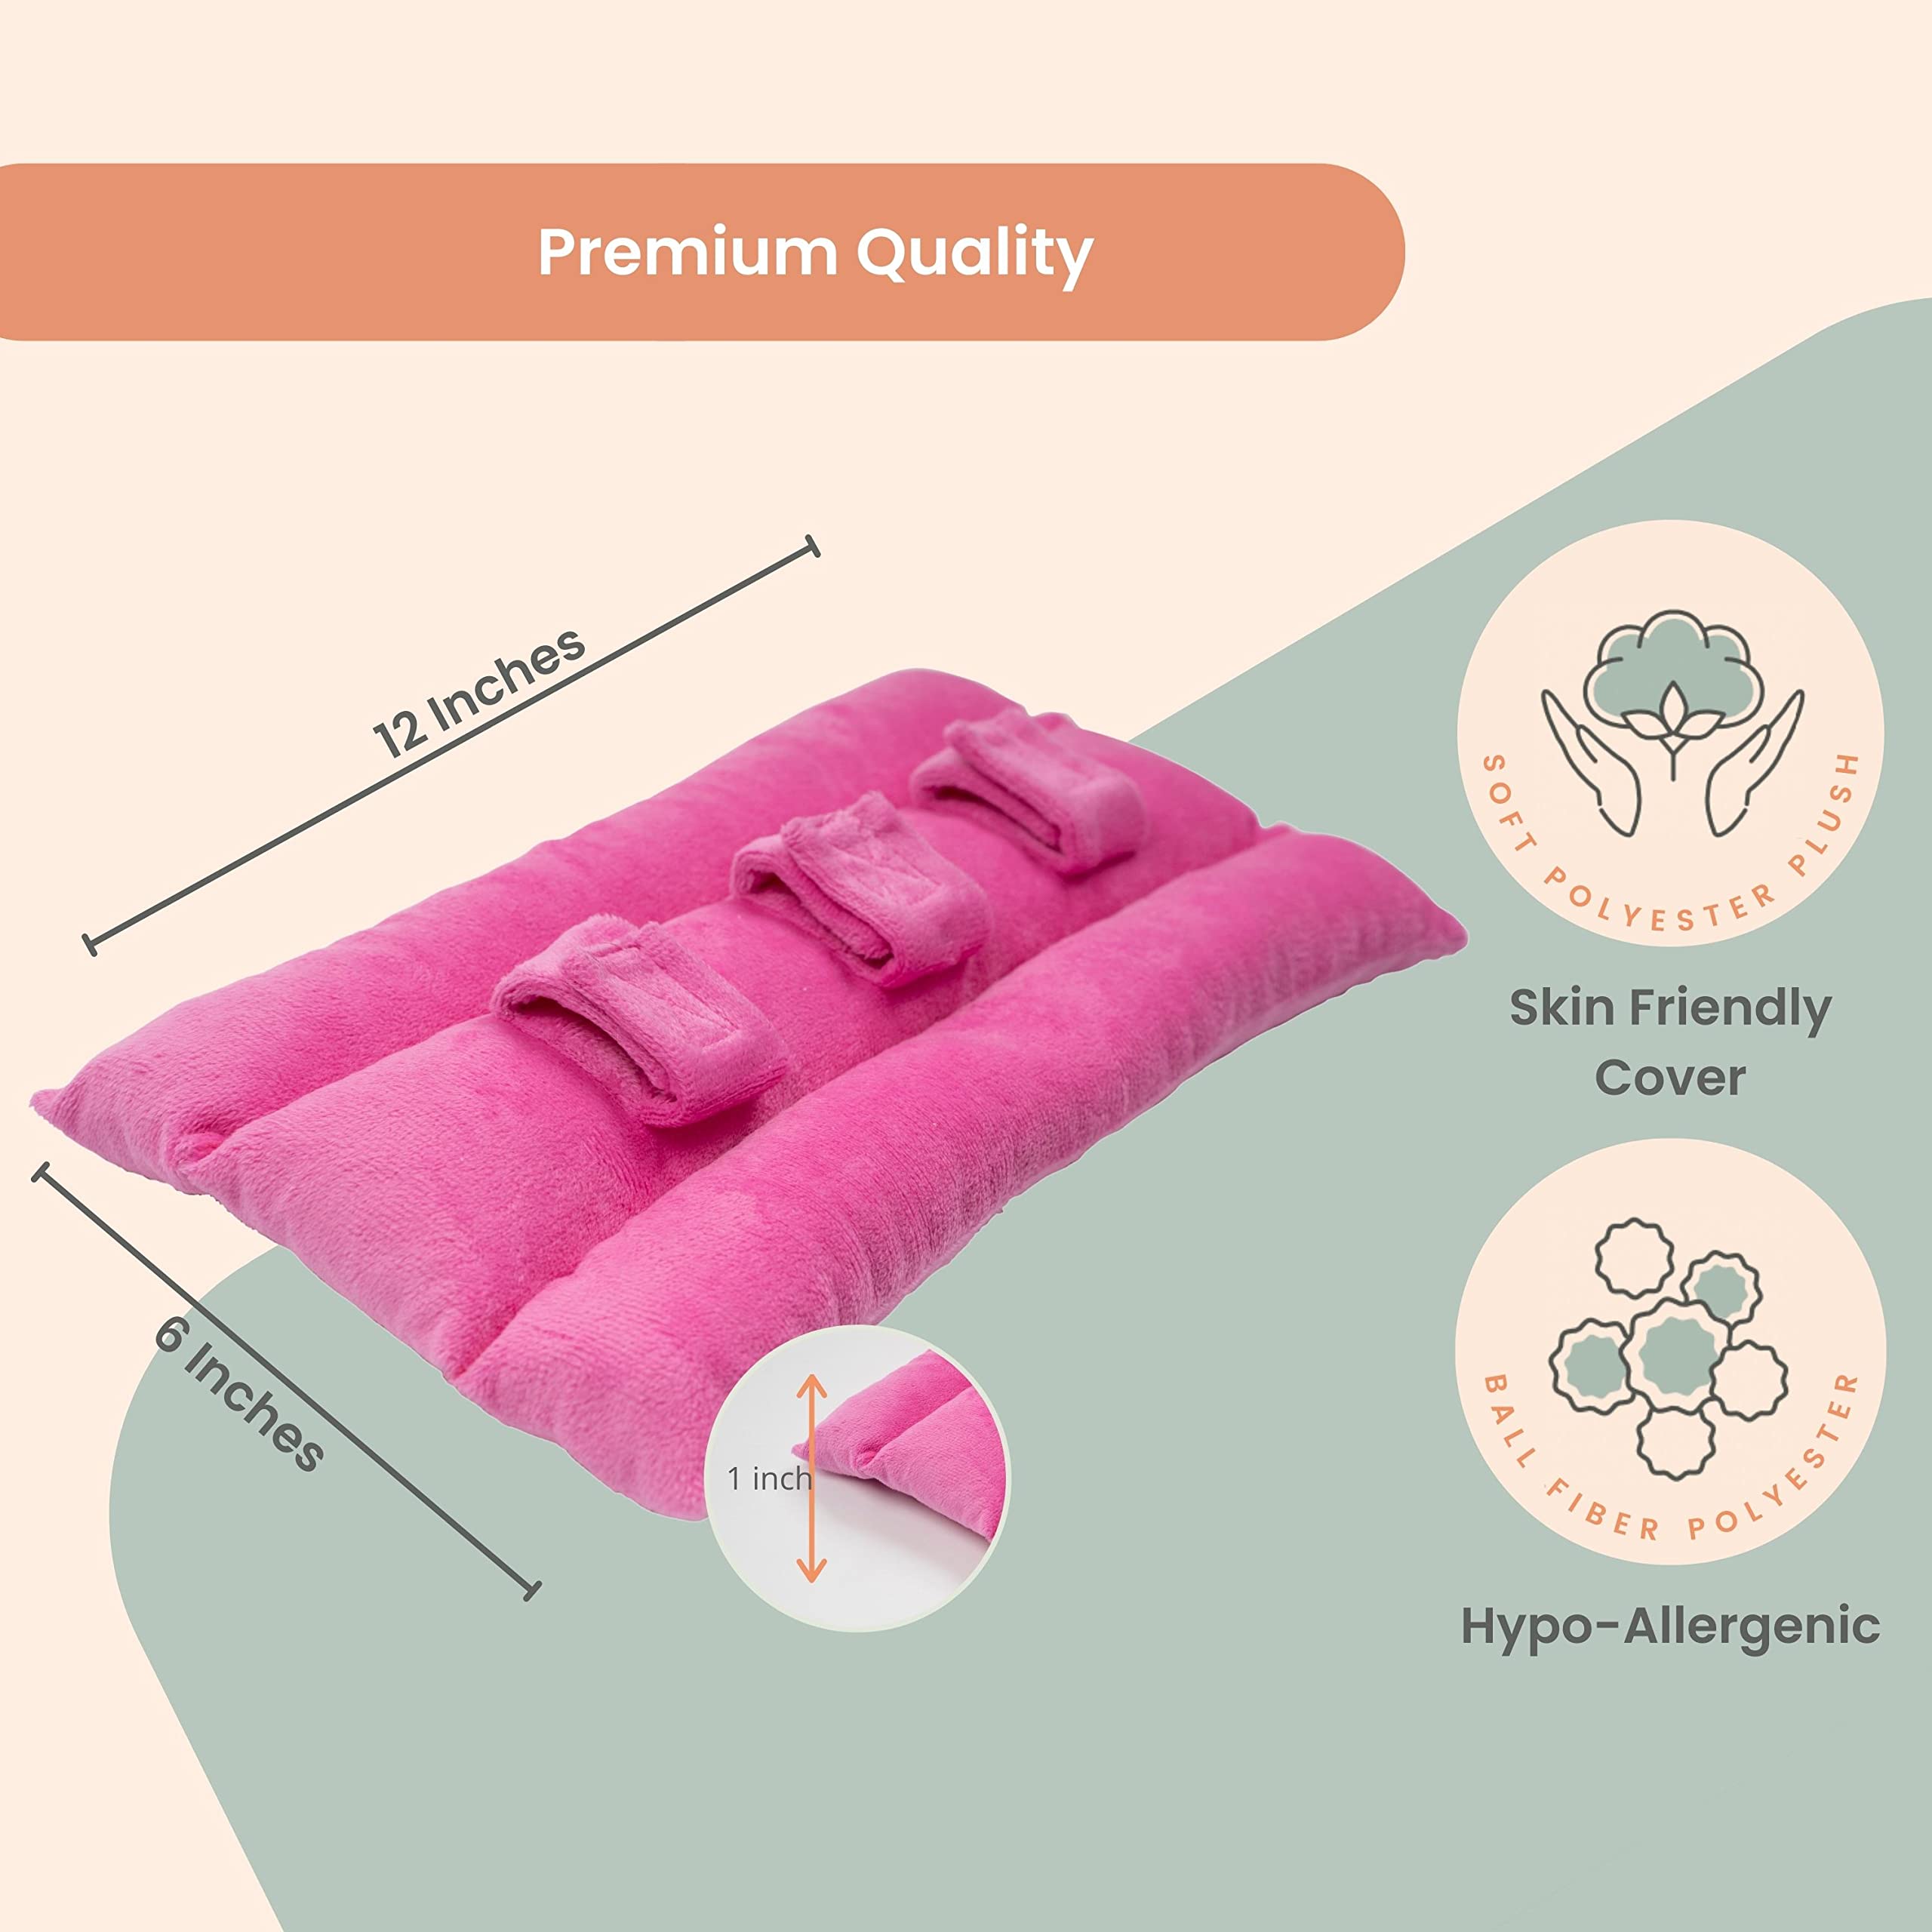 Bundle Post Mastectomy Pillow + Seatbelt Pillow for After Surgery - Recovery After Breast Cancer Surgery, Port Pillow For Seatbelt, Breast Augmentation, Heart Surgery - Breast Cancer Gifts for Women